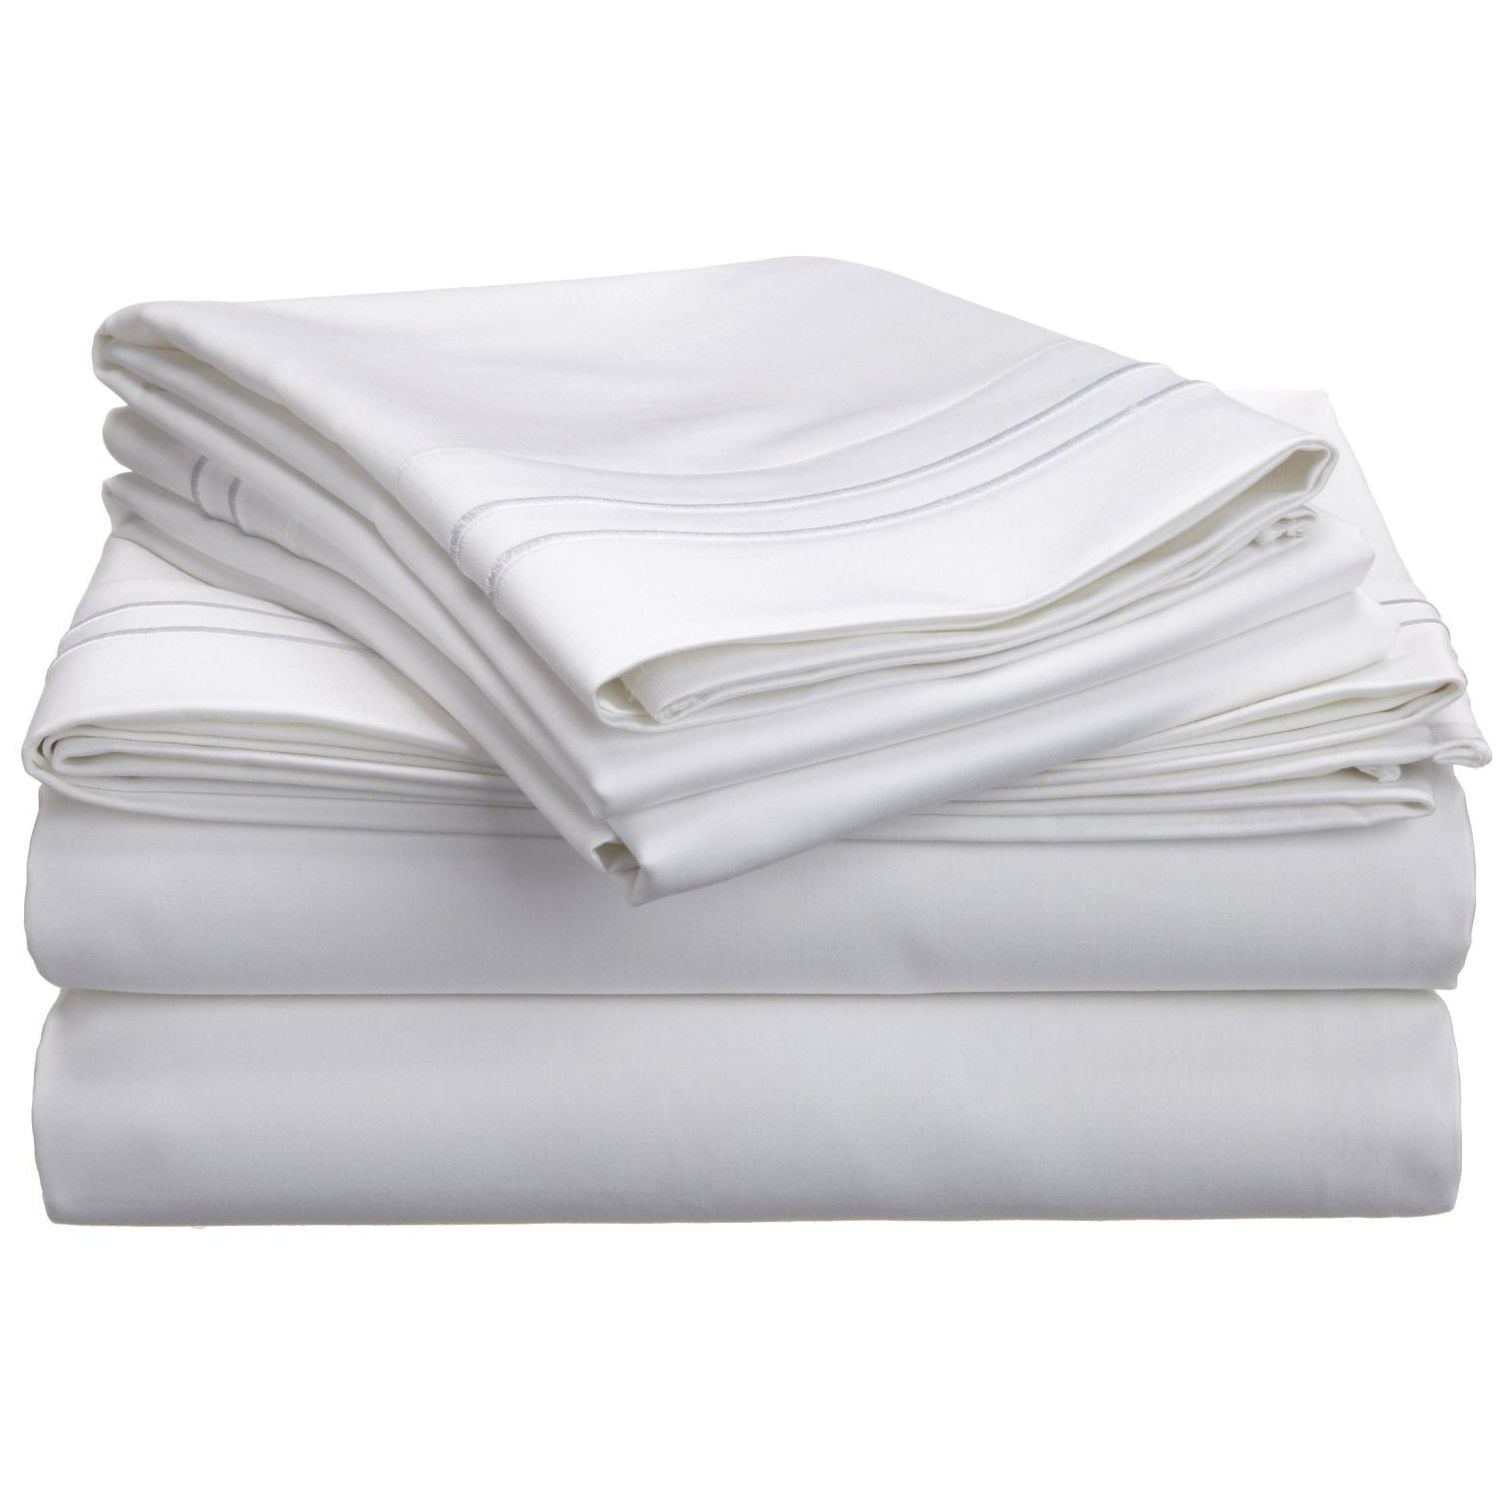 Impressions 800 Thread Count Ivory Combed Cotton Oversized King Sheet Set 